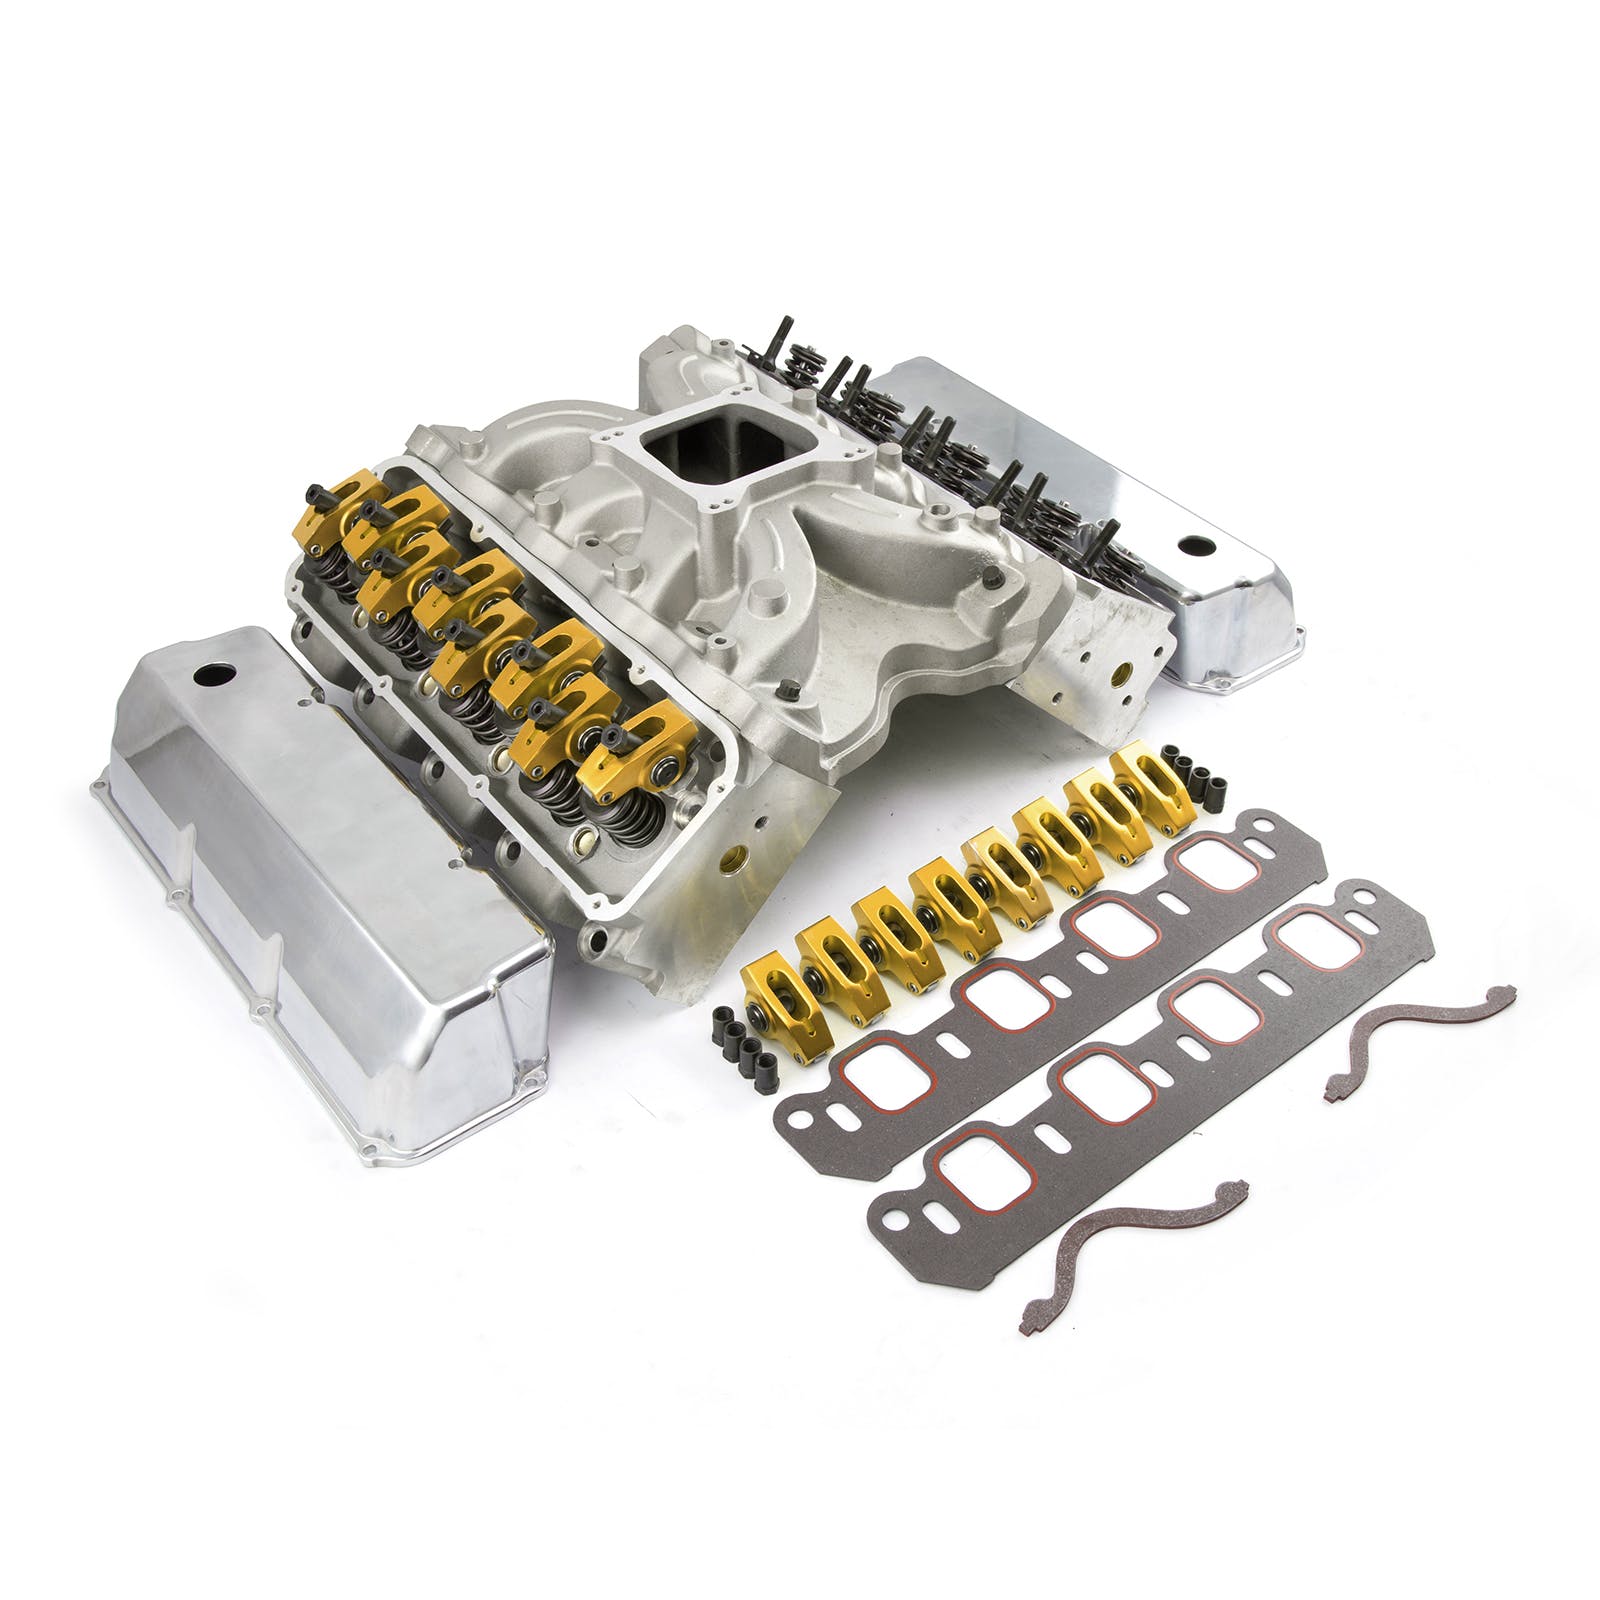 Speedmaster PCE435.1040 Hyd FT Cylinder Head Top End Engine Combo Kit